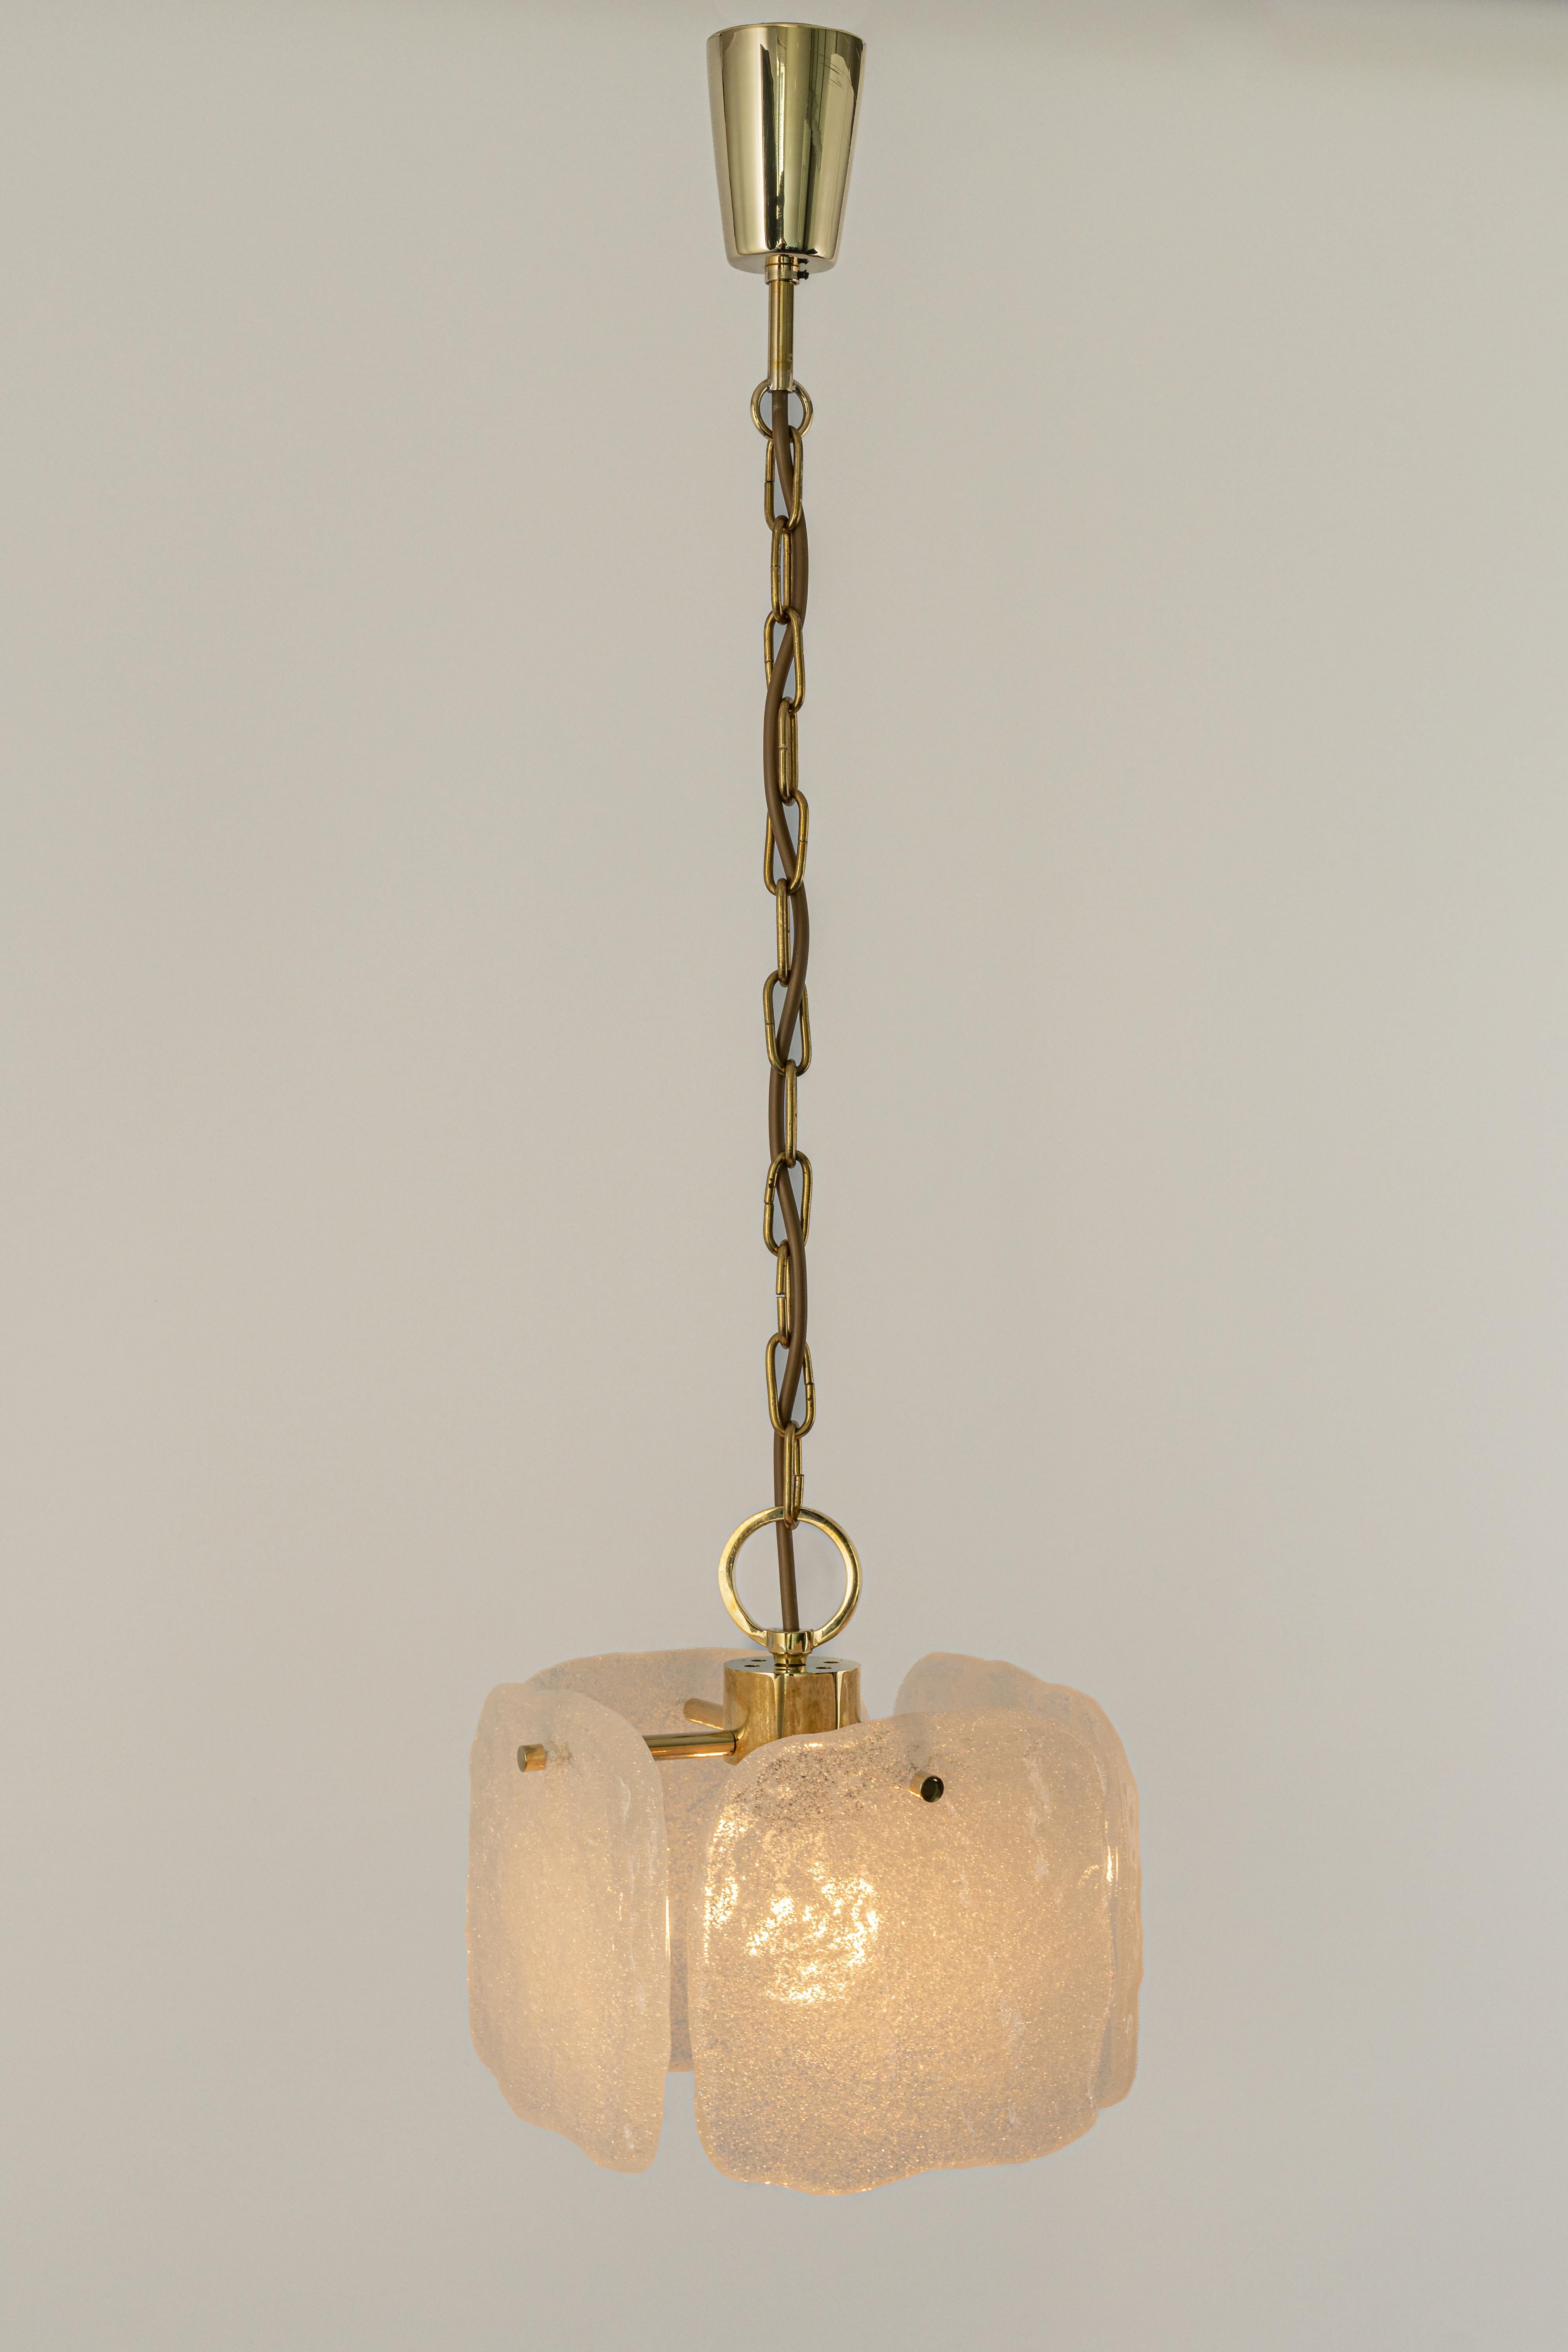 1 of 3 Petite Murano Glass Pendant Light by Kalmar, Germany, 1960s For Sale 3